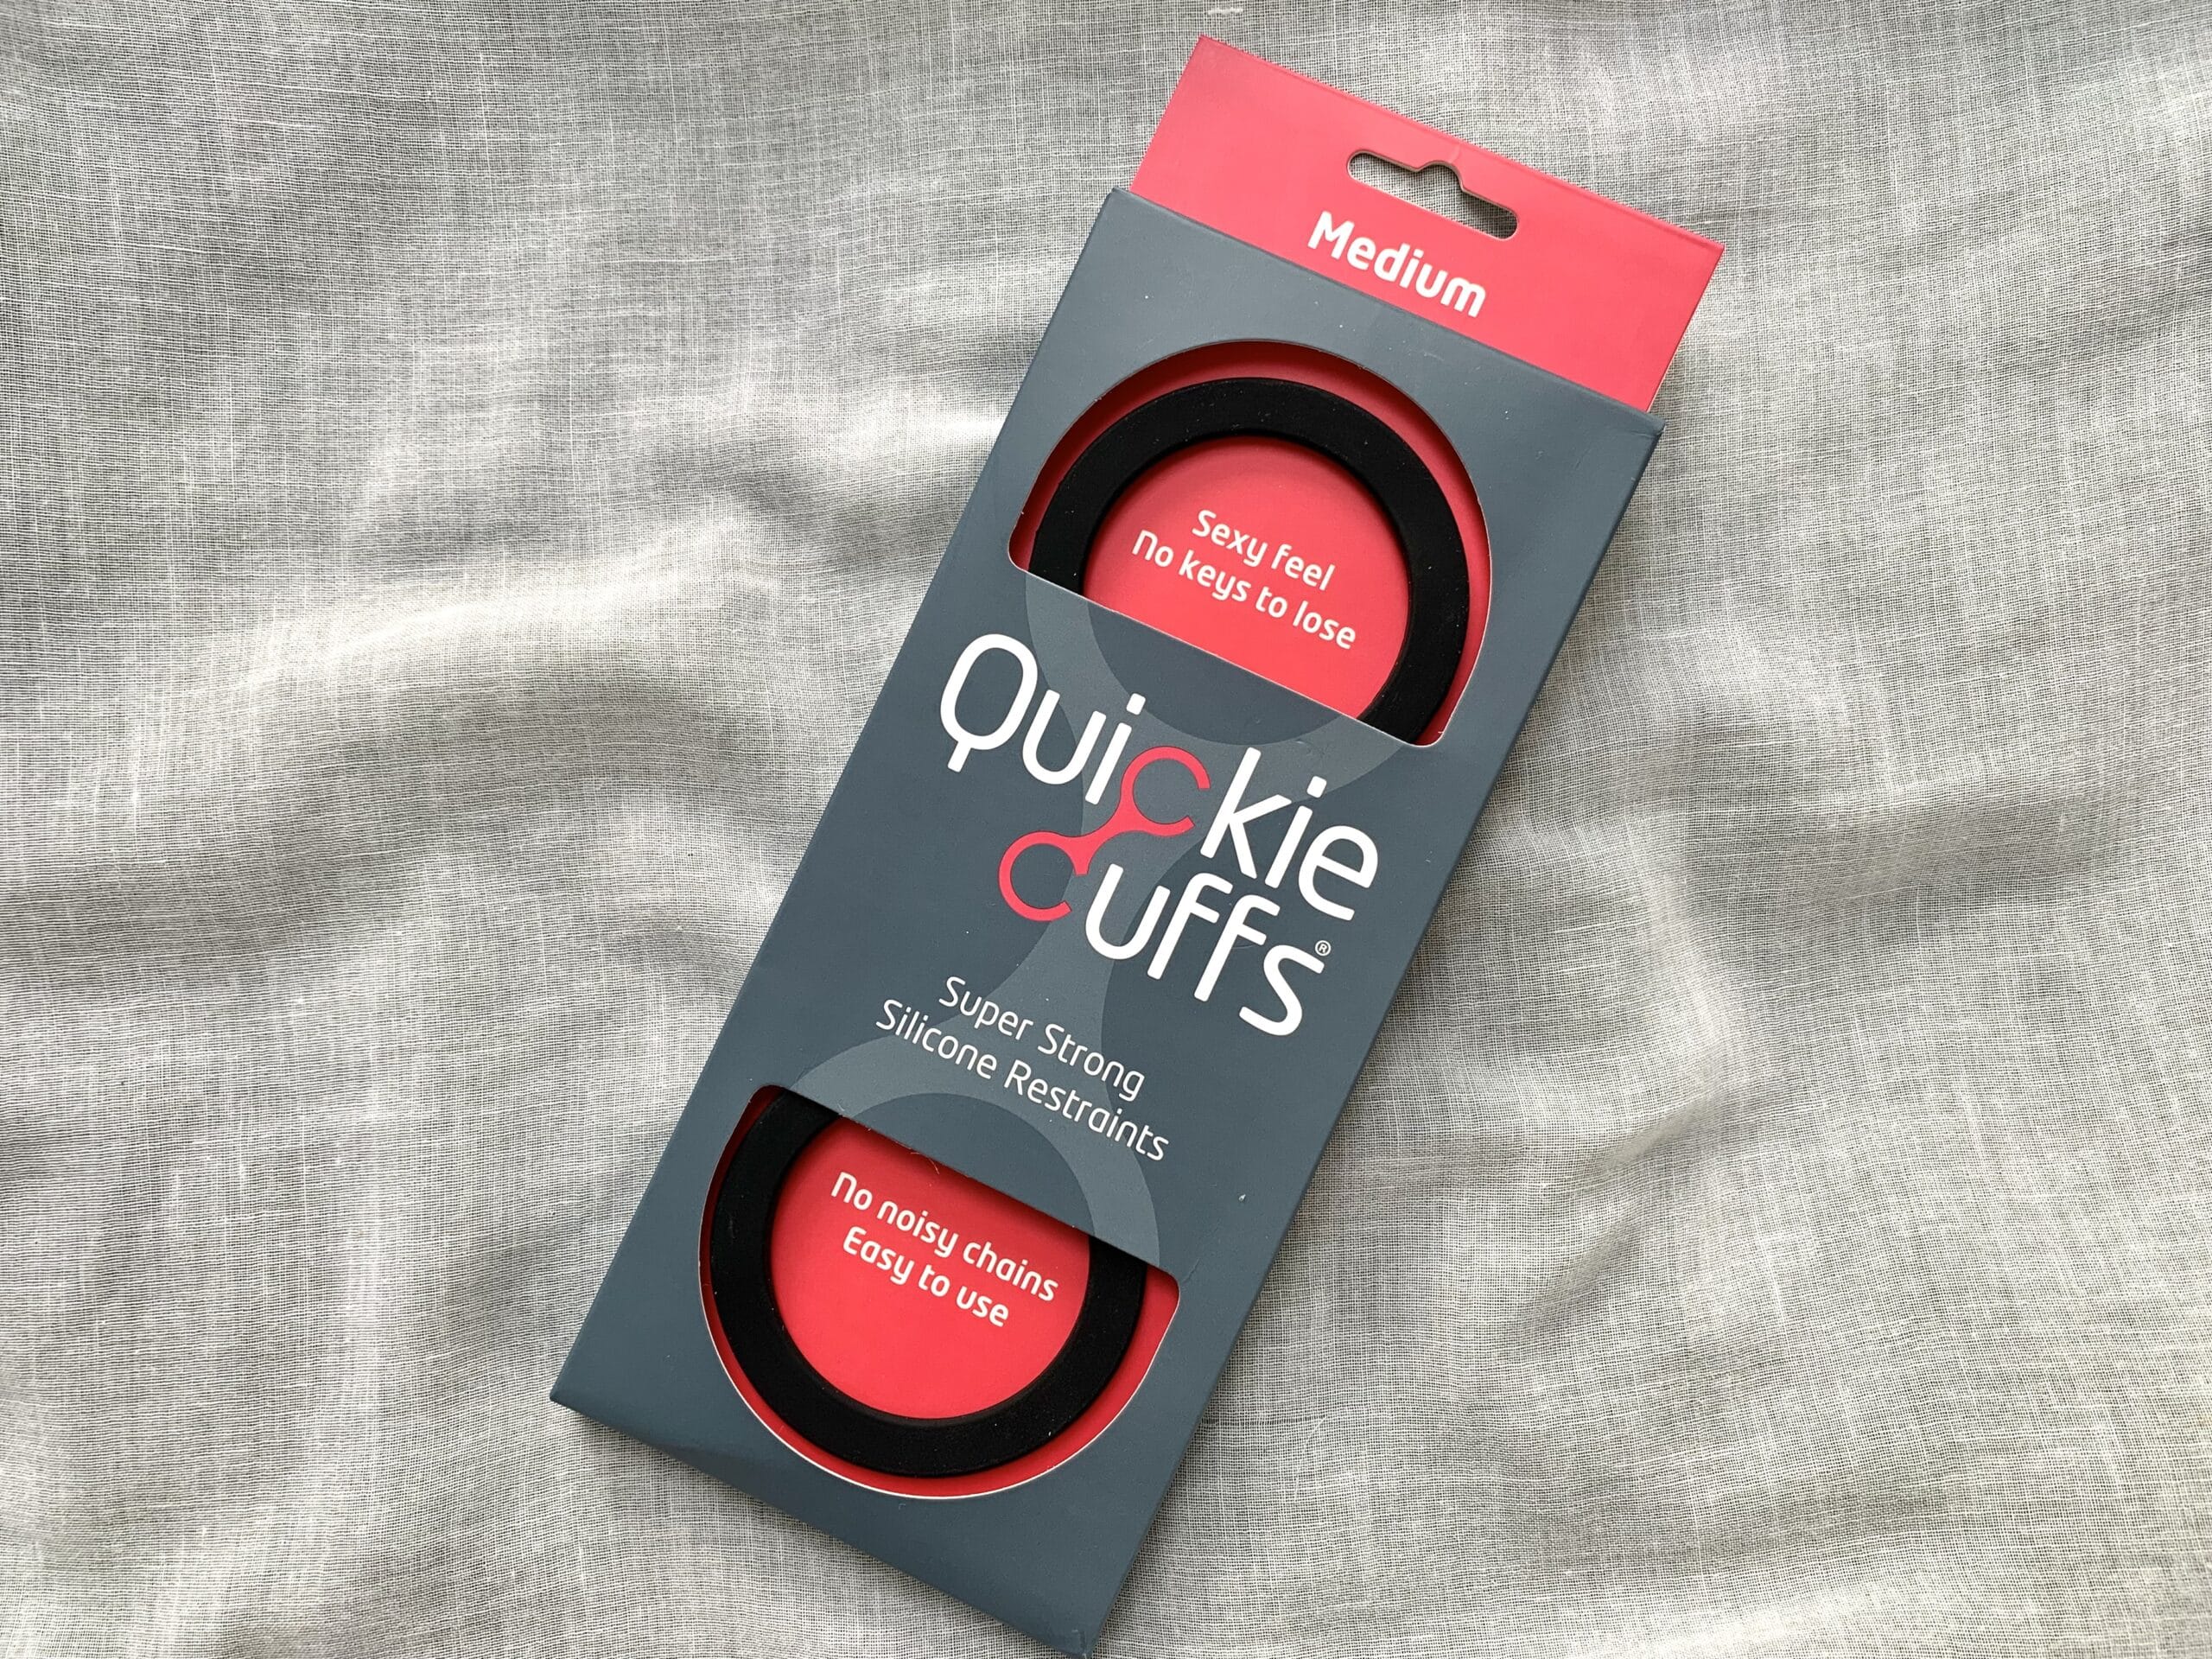 Quickie Cuffs Unboxing the Quickie Cuffs: First Impressions